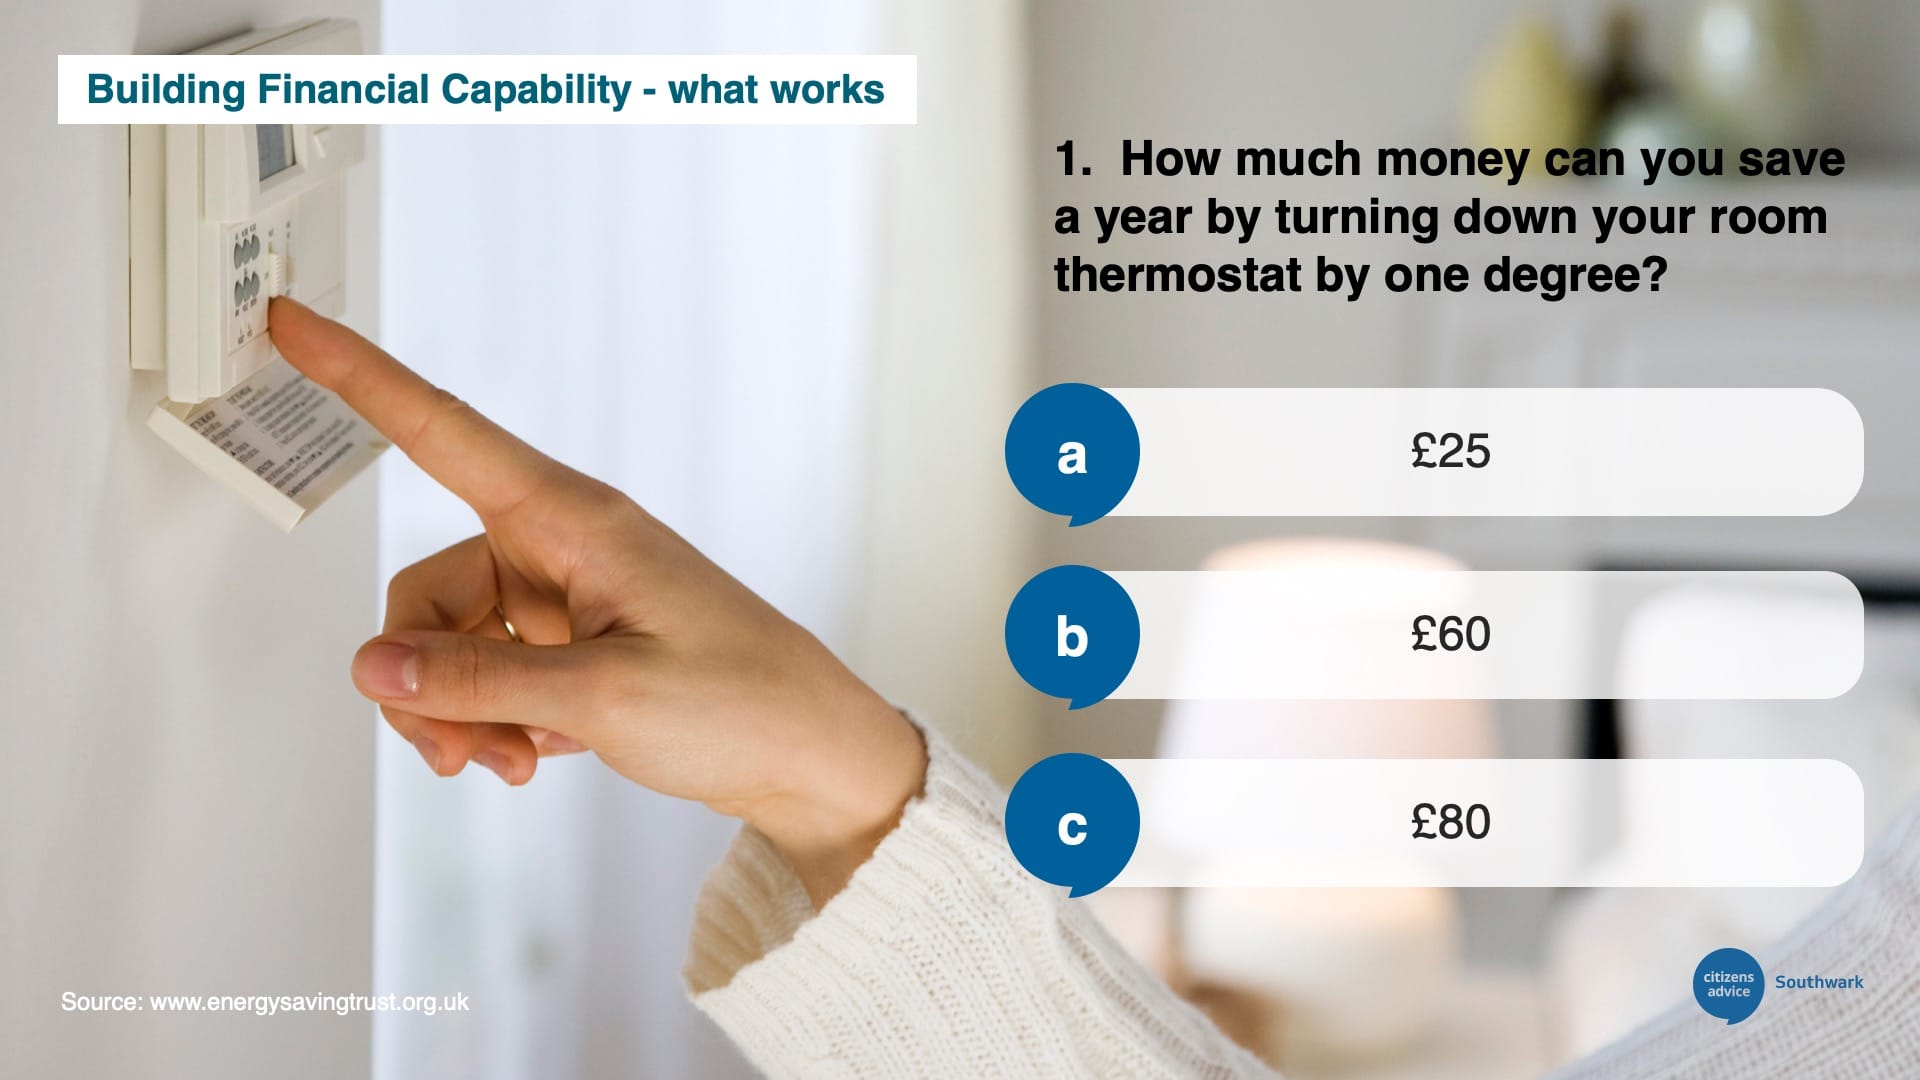 Citizens Advice PowerPoint Question Slide After